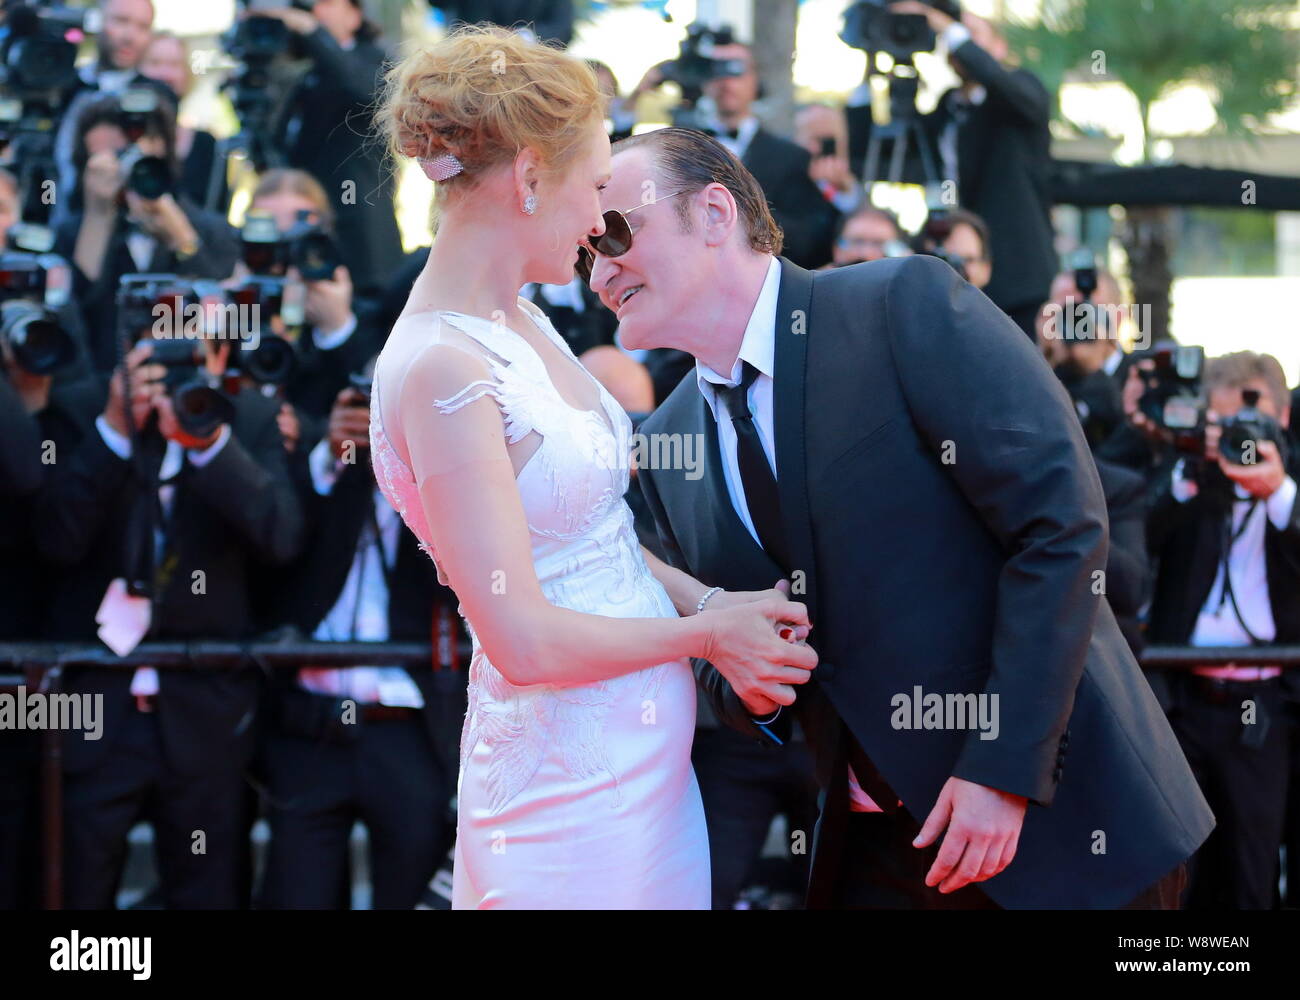 American director Quentin Tarantino, right, whispers to actress Uma Thurman as they arrive at the red carpet for the closing ceremony of the 67th Cann Stock Photo